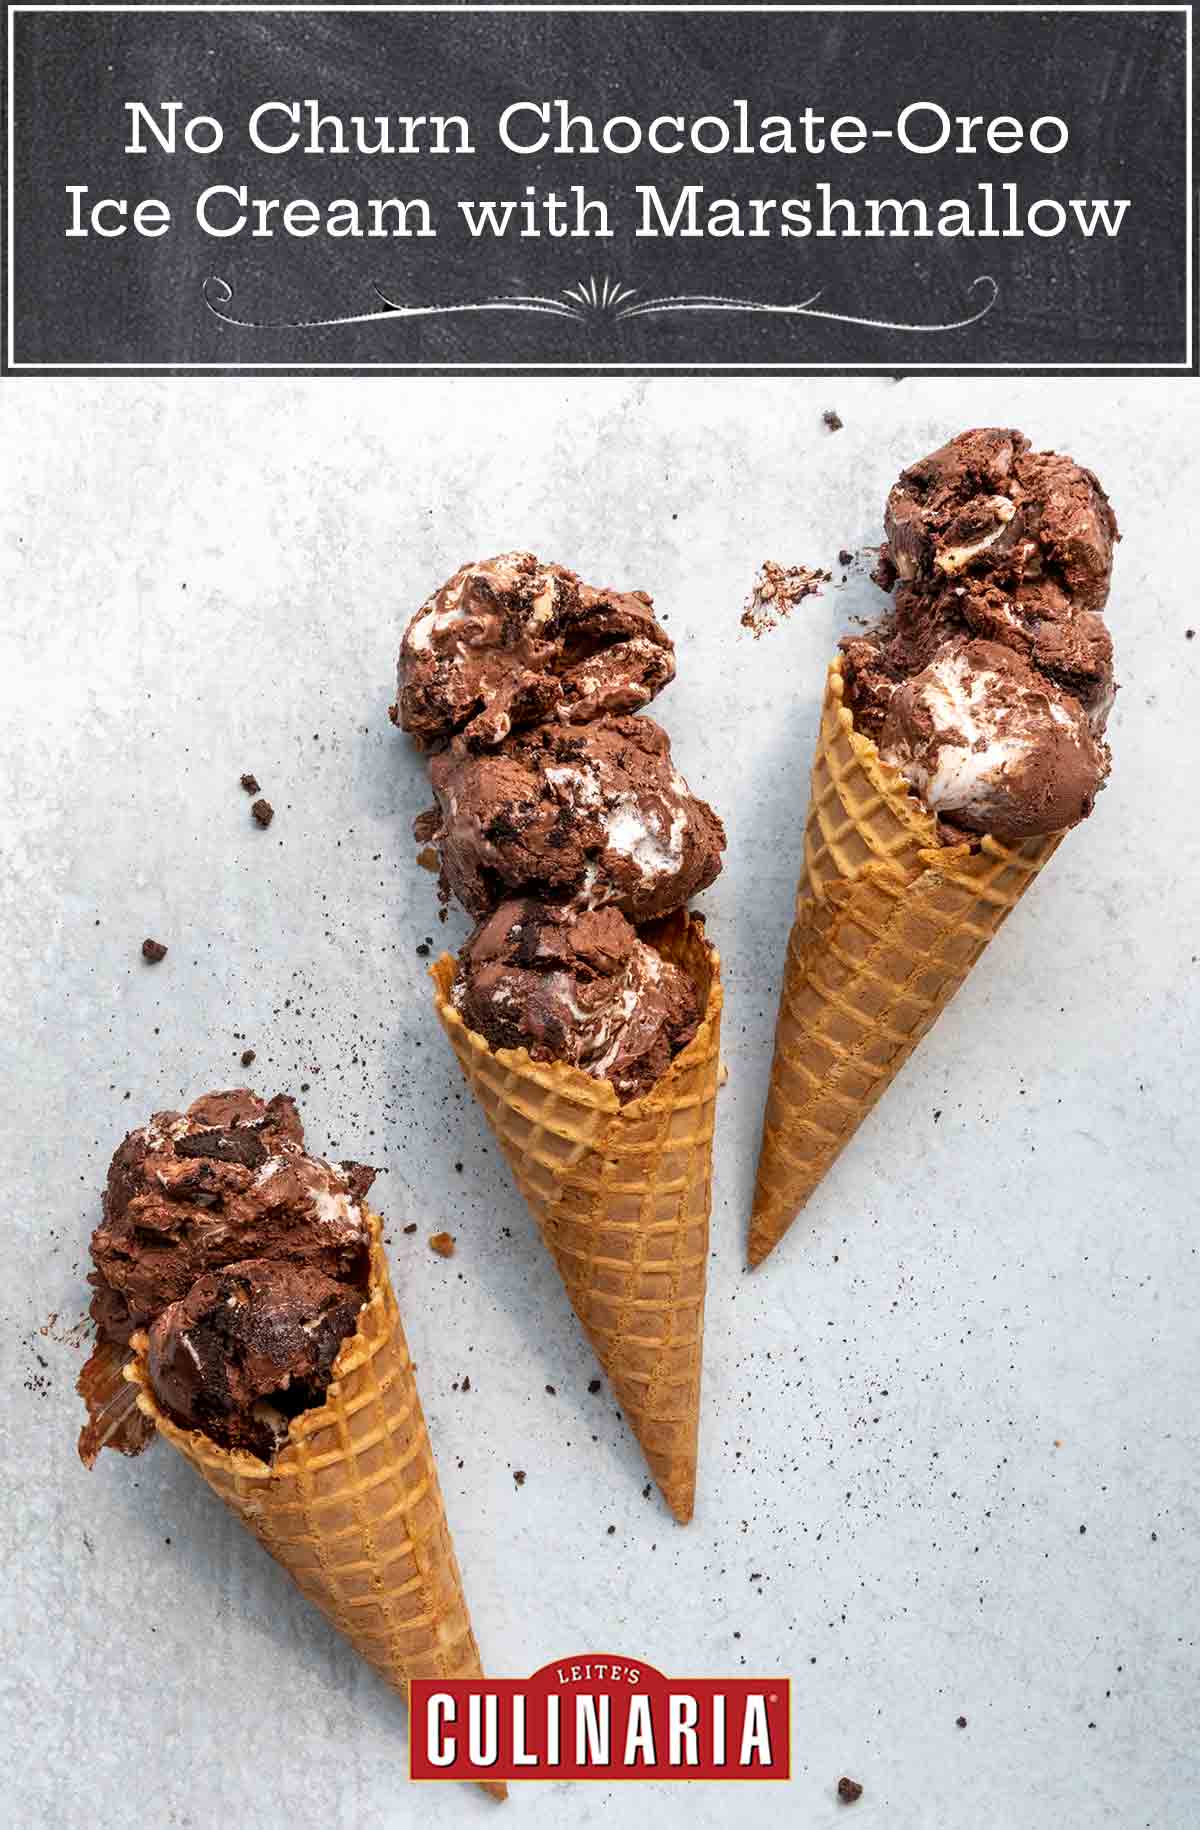 Three waffle cones, each filled with two or three scoops of chocolate Oreo ice cream.